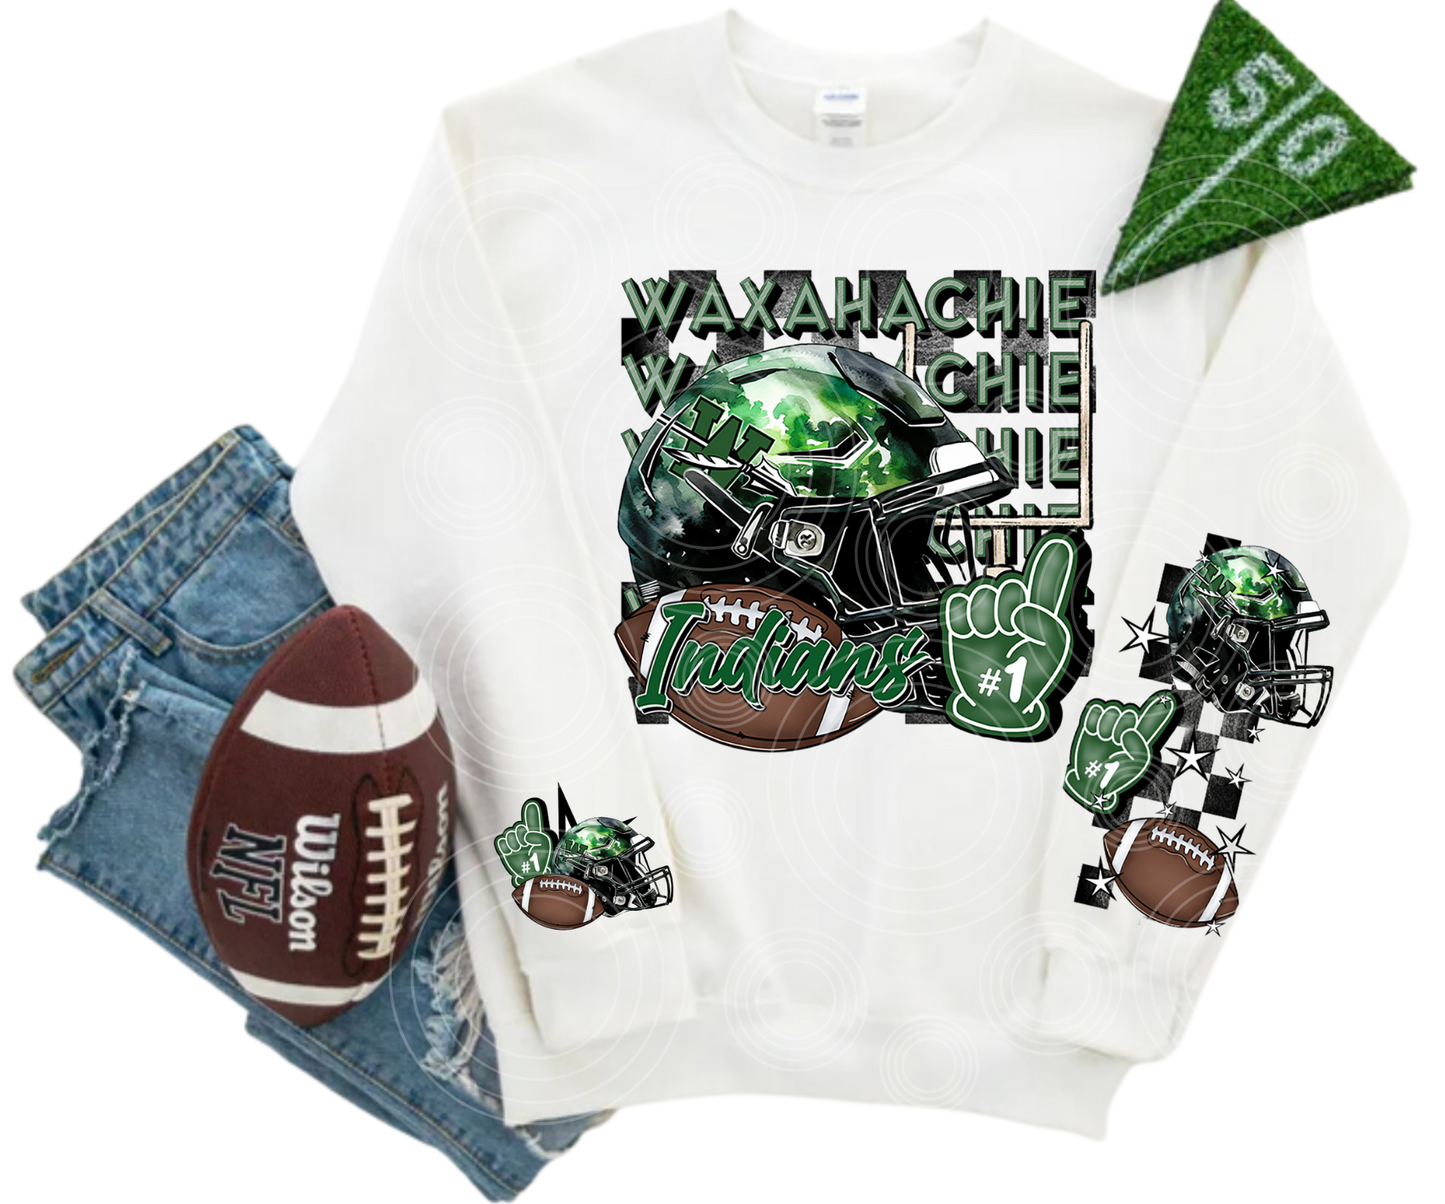 Waxahachie Indians with sleeve and pocket